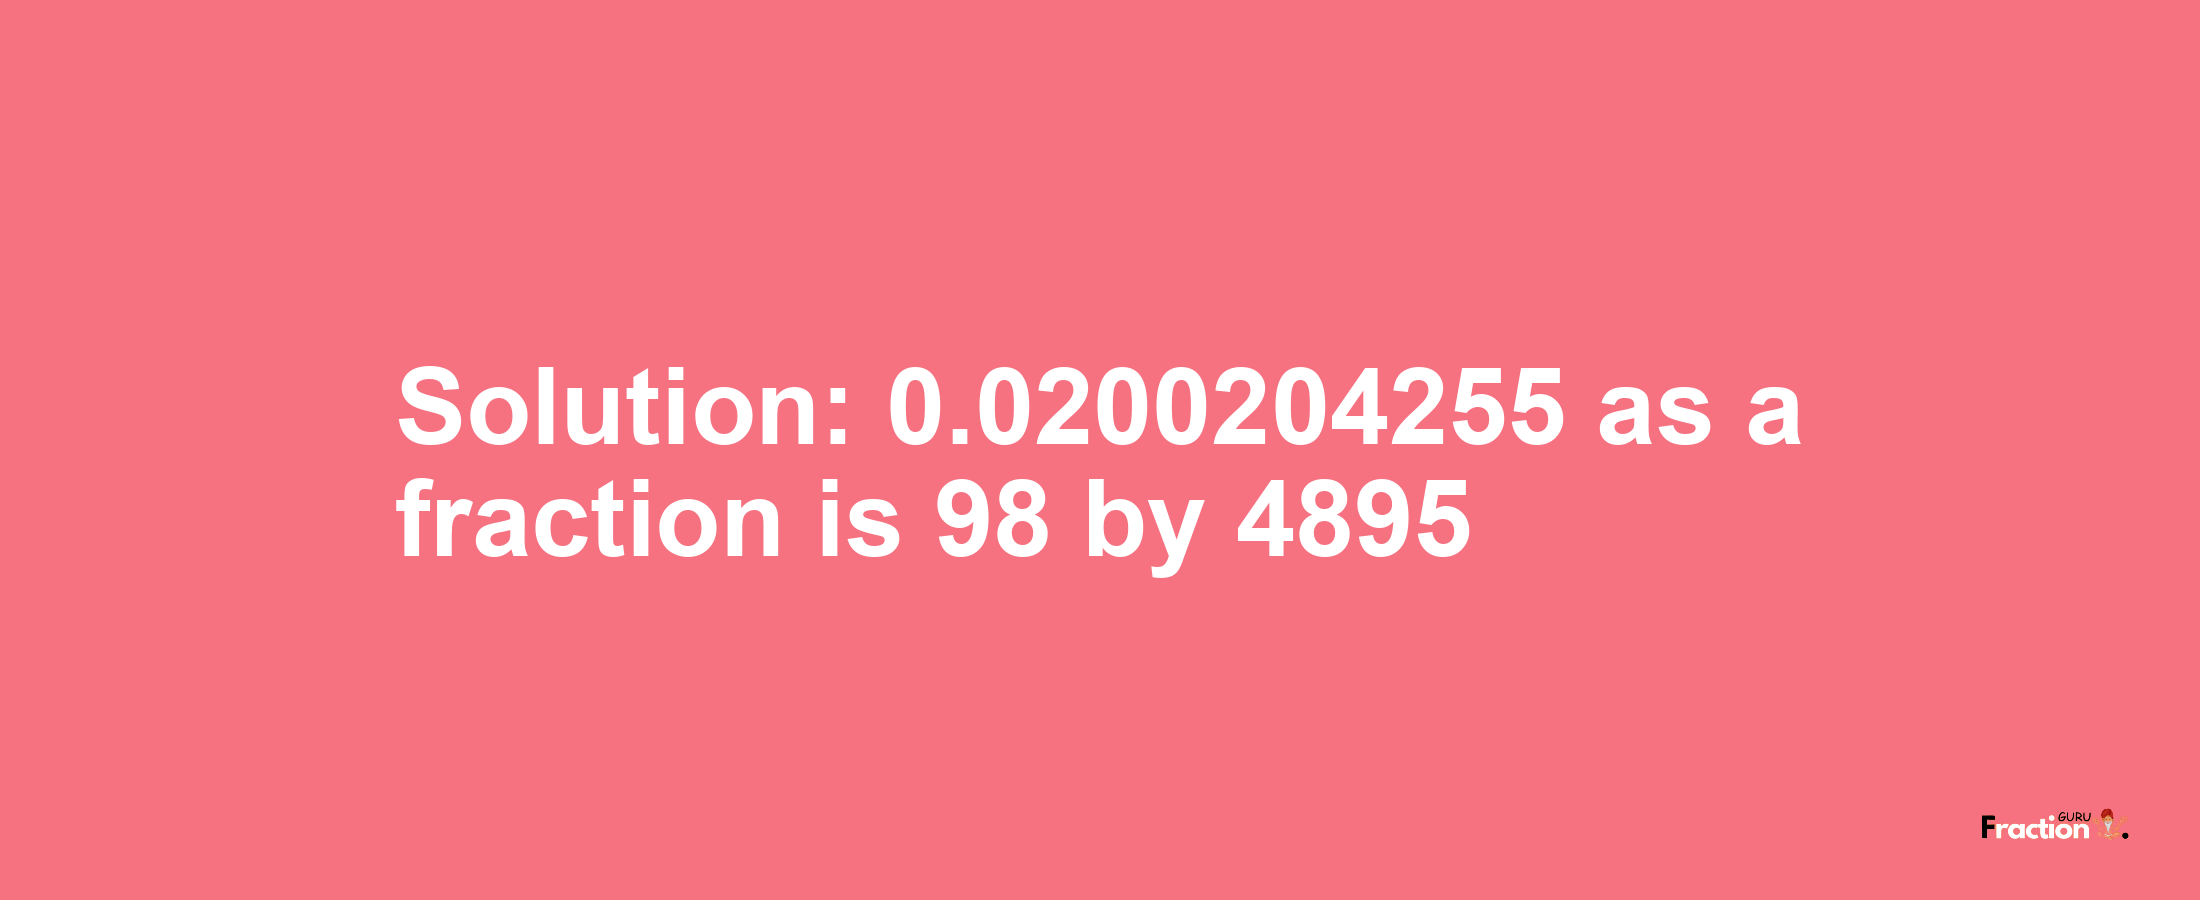 Solution:0.0200204255 as a fraction is 98/4895